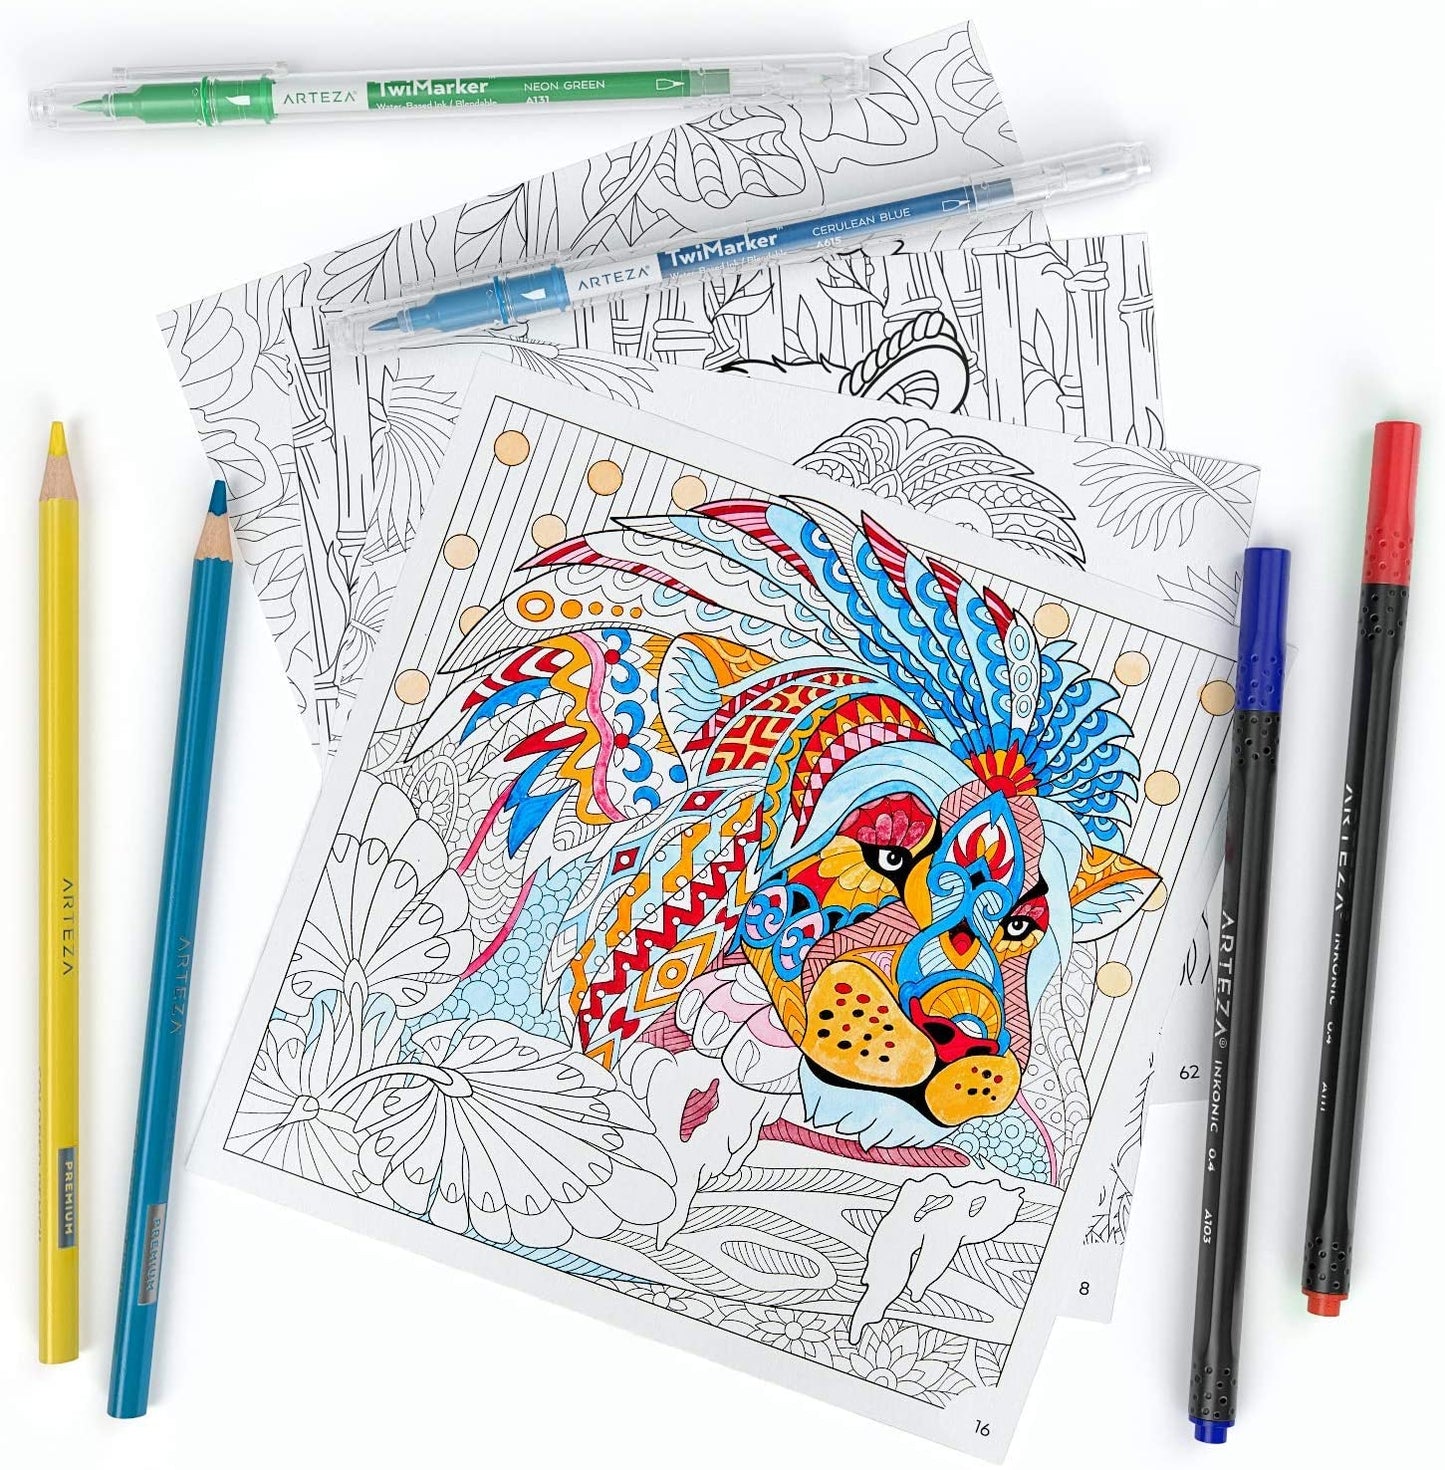 Coloring Books Animal & Doodle Illustrations Gray Outlines 72 sheets - Set of 2